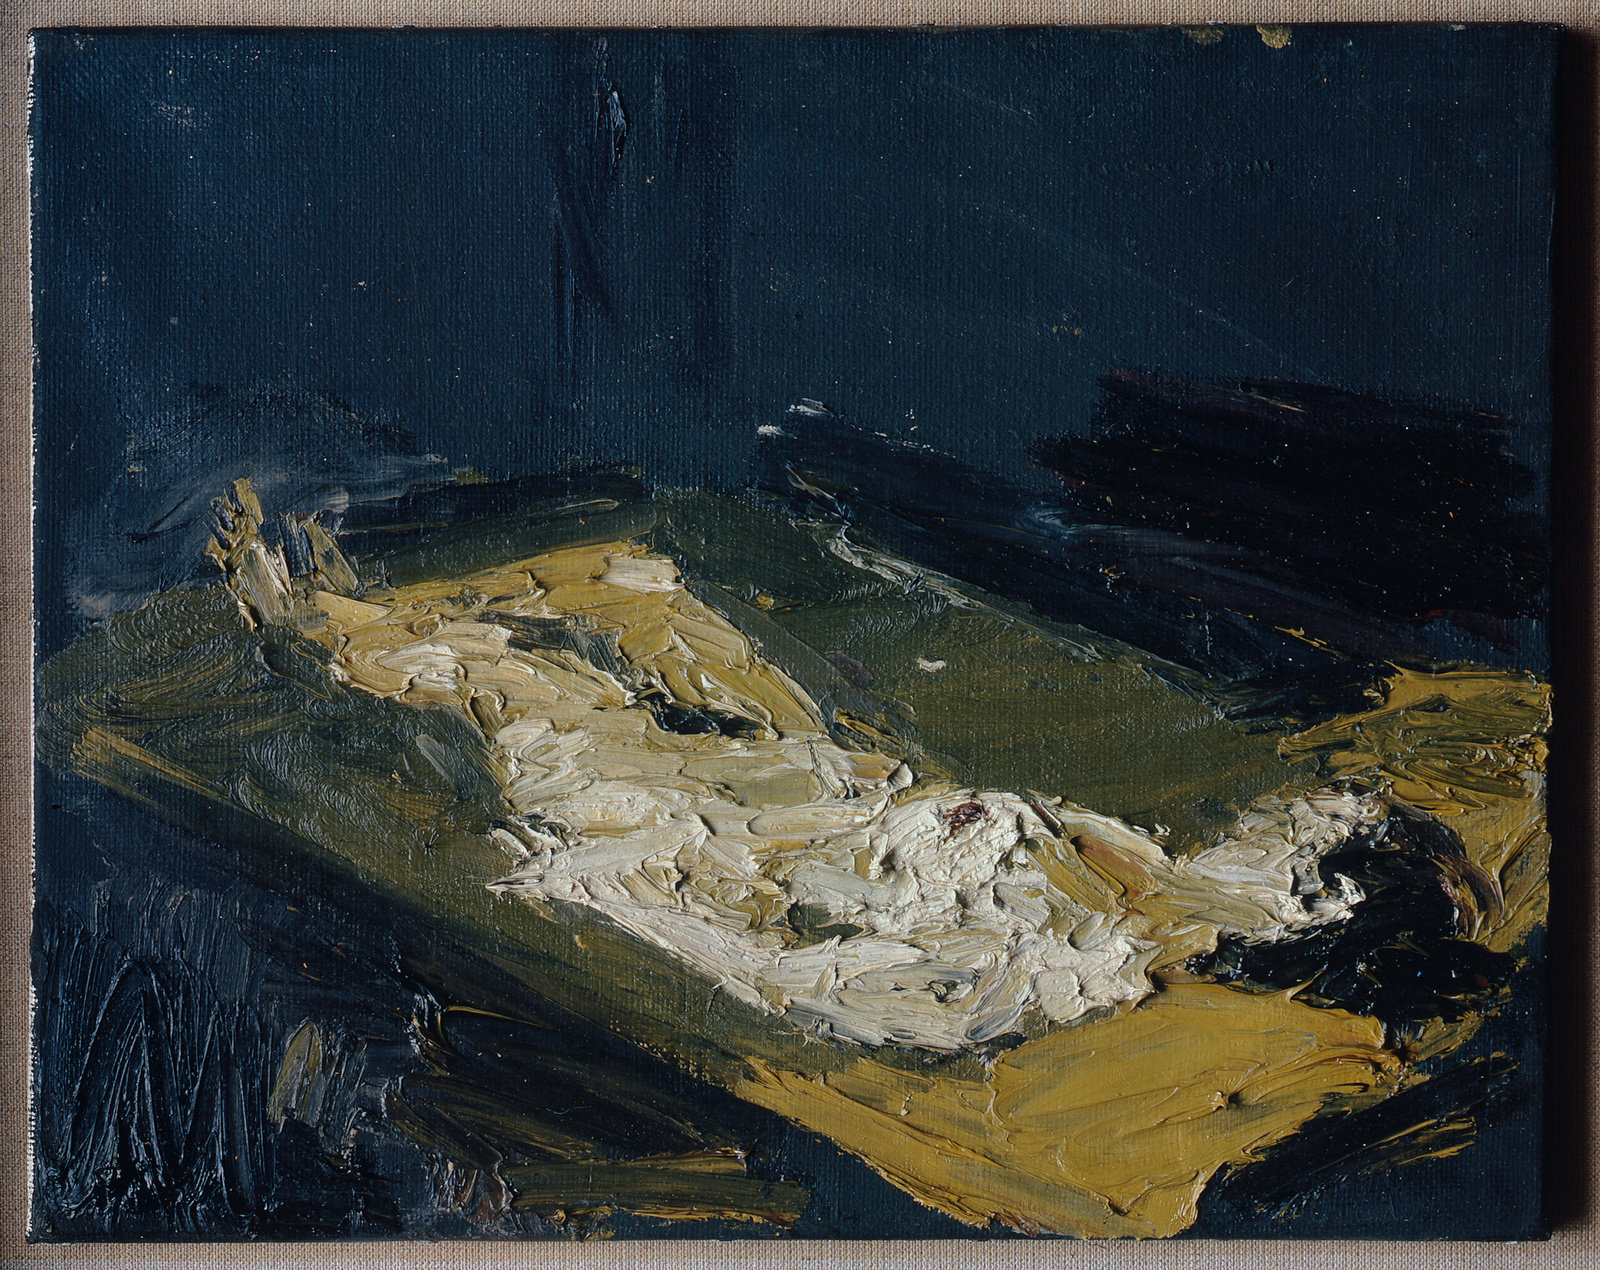 Auerbach, e.o.w., nude, lying on her back, 1959, oil on canvas, 16 x 20 in., 40.6 x 50.8 cm